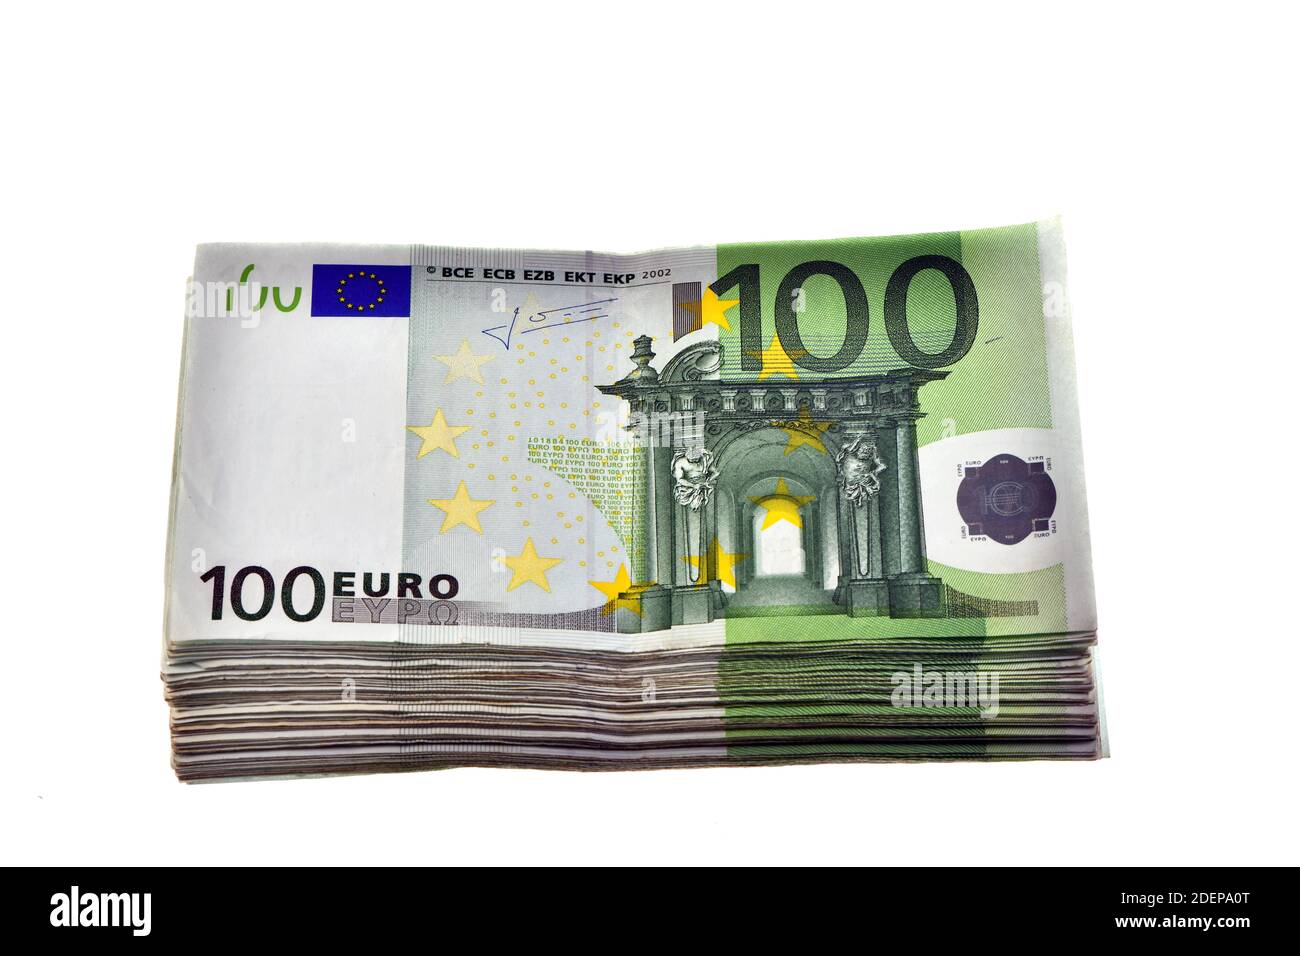 a pile of 10,000 euros -1000 € - in one hundred 100 euro banknotes isolated on white background Stock Photo